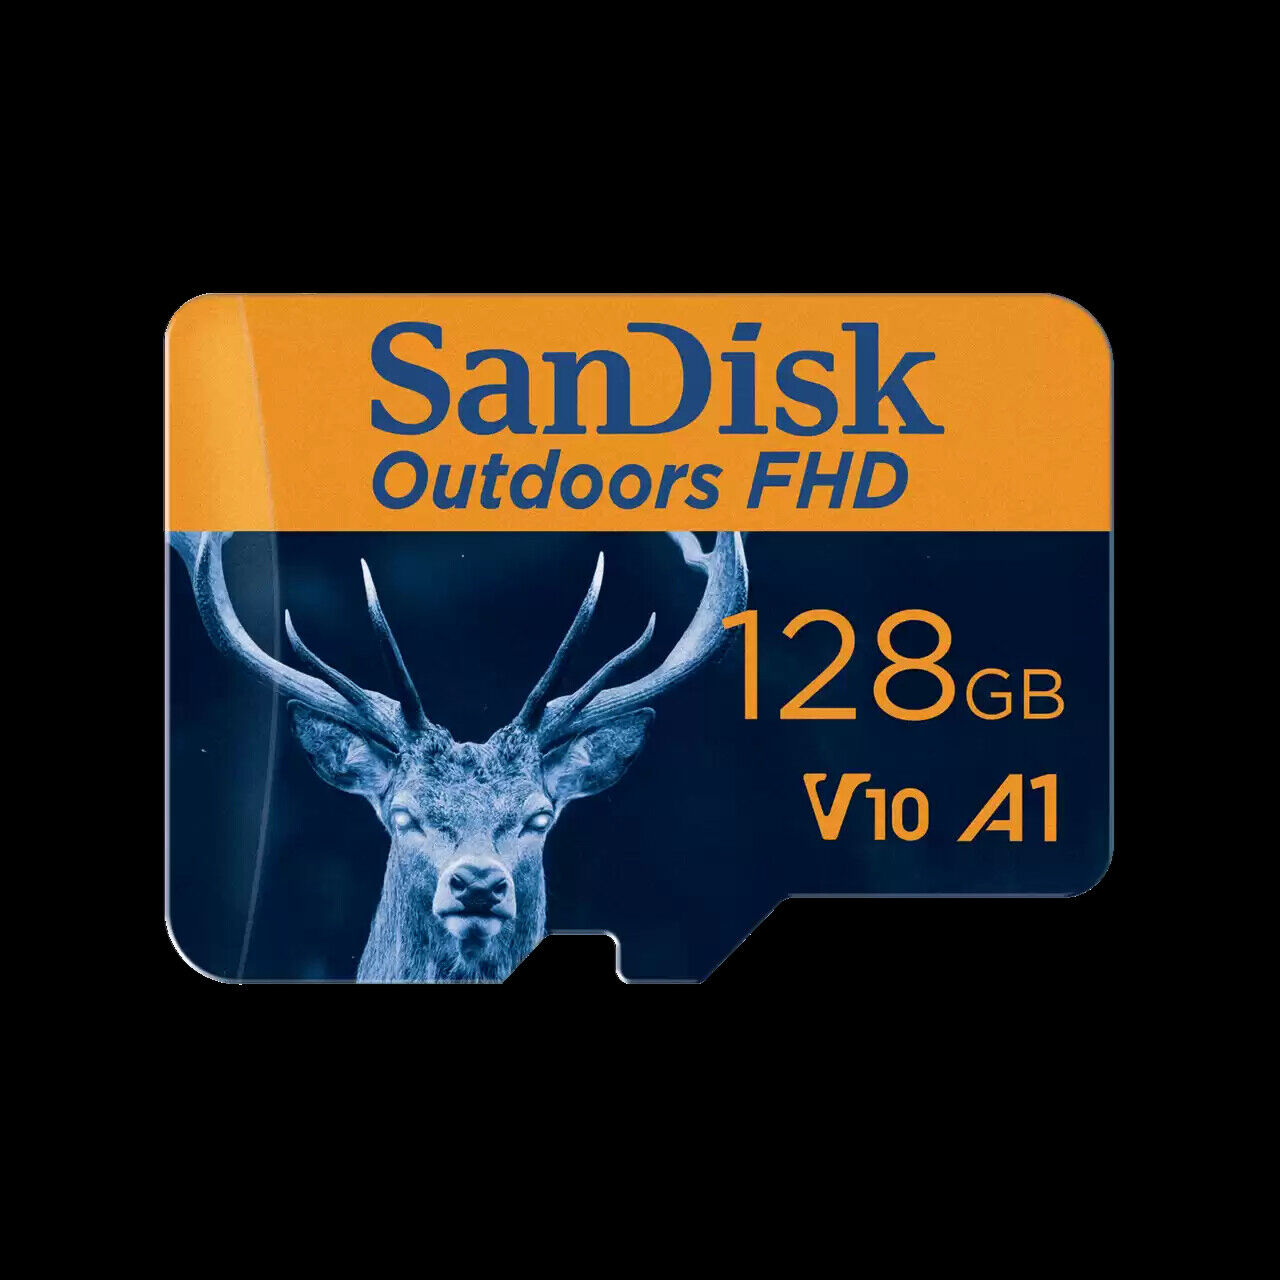 SanDisk 128GB microSDXC UHS-I Card with Adapter, Single Pack- SDSQUBC-128G-GN6VA